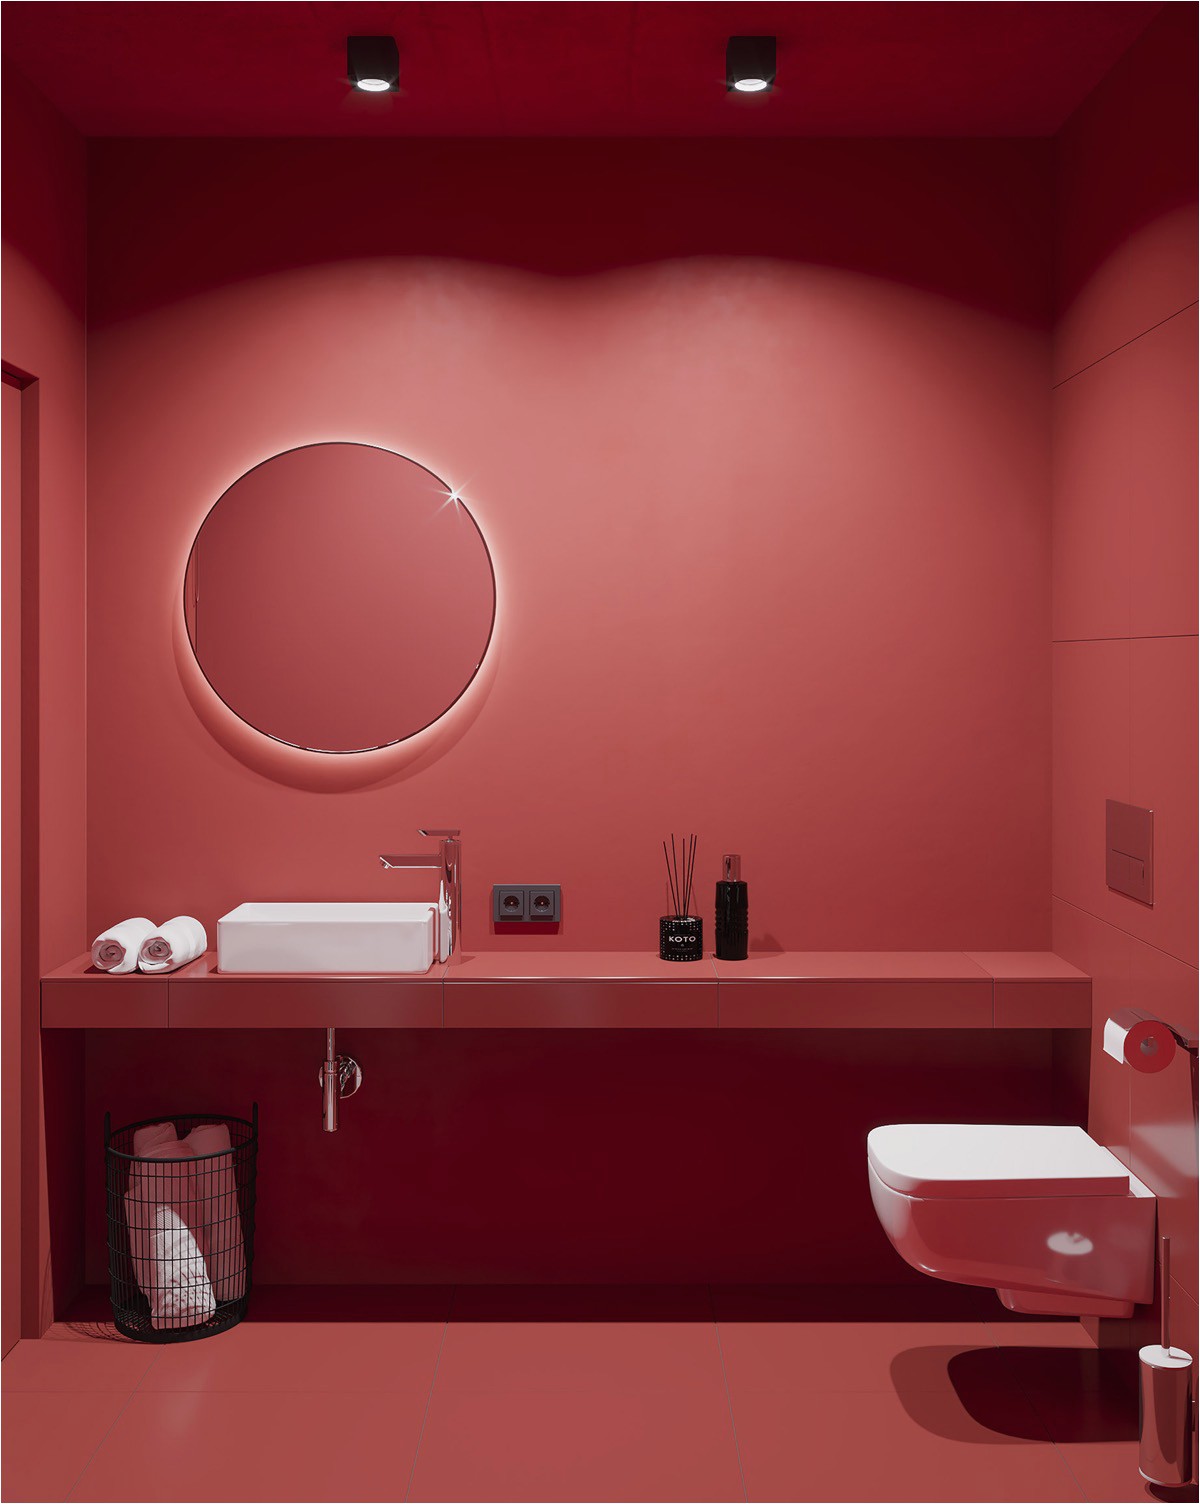 Round Red Bathroom Rug 51 Red Bathrooms Design Ideas with Tips to Decorate and